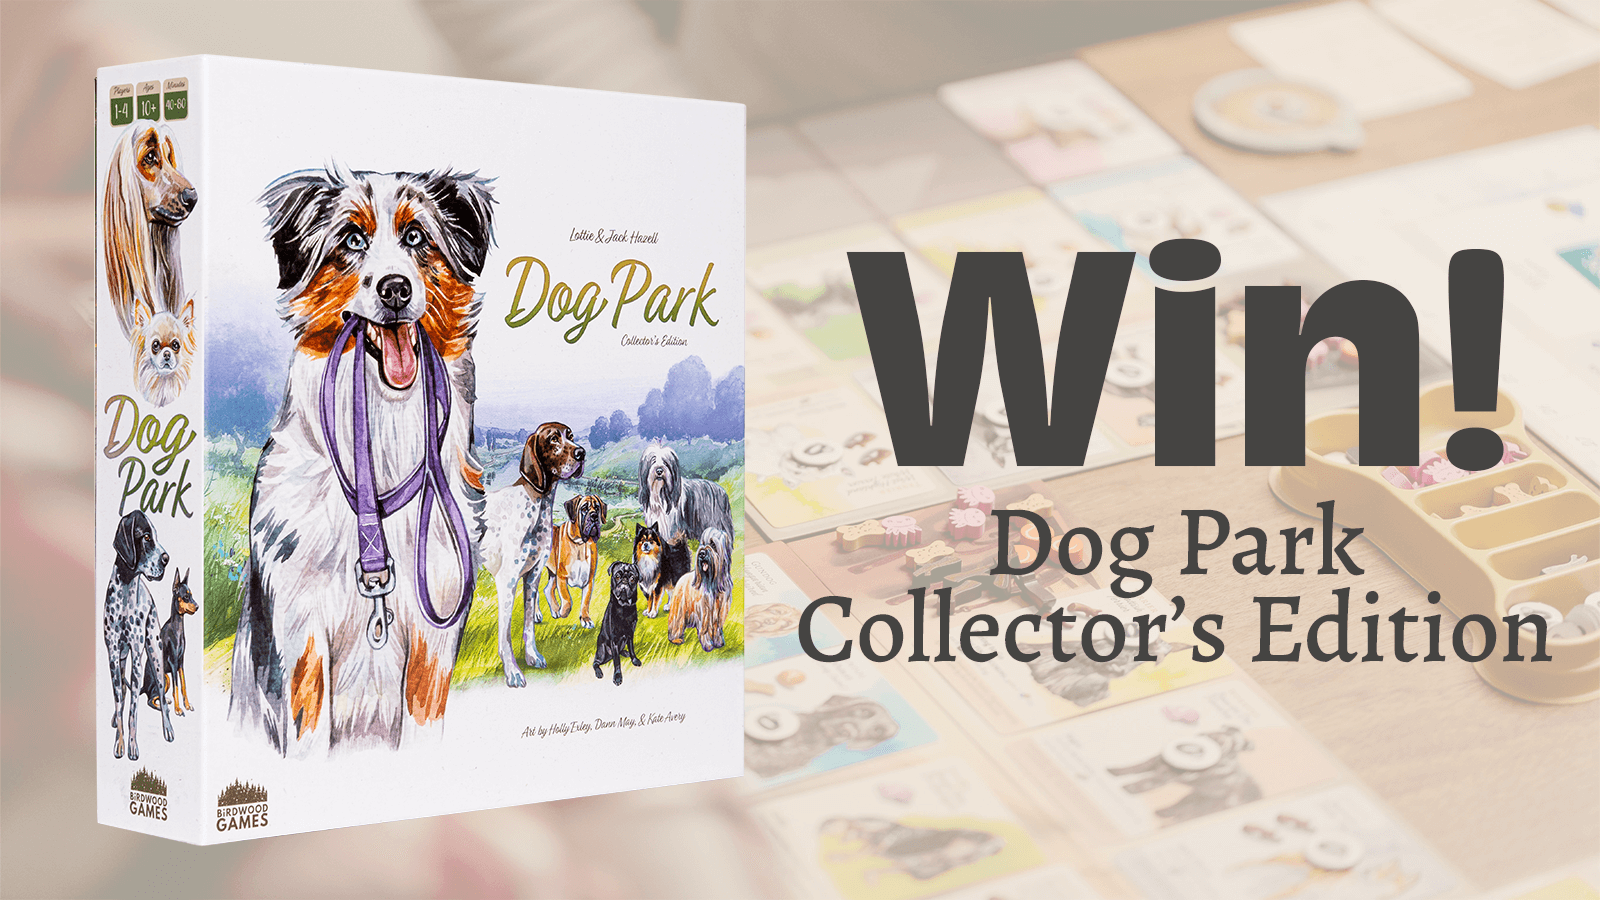 Win a Collector's Edition of Dog Park!